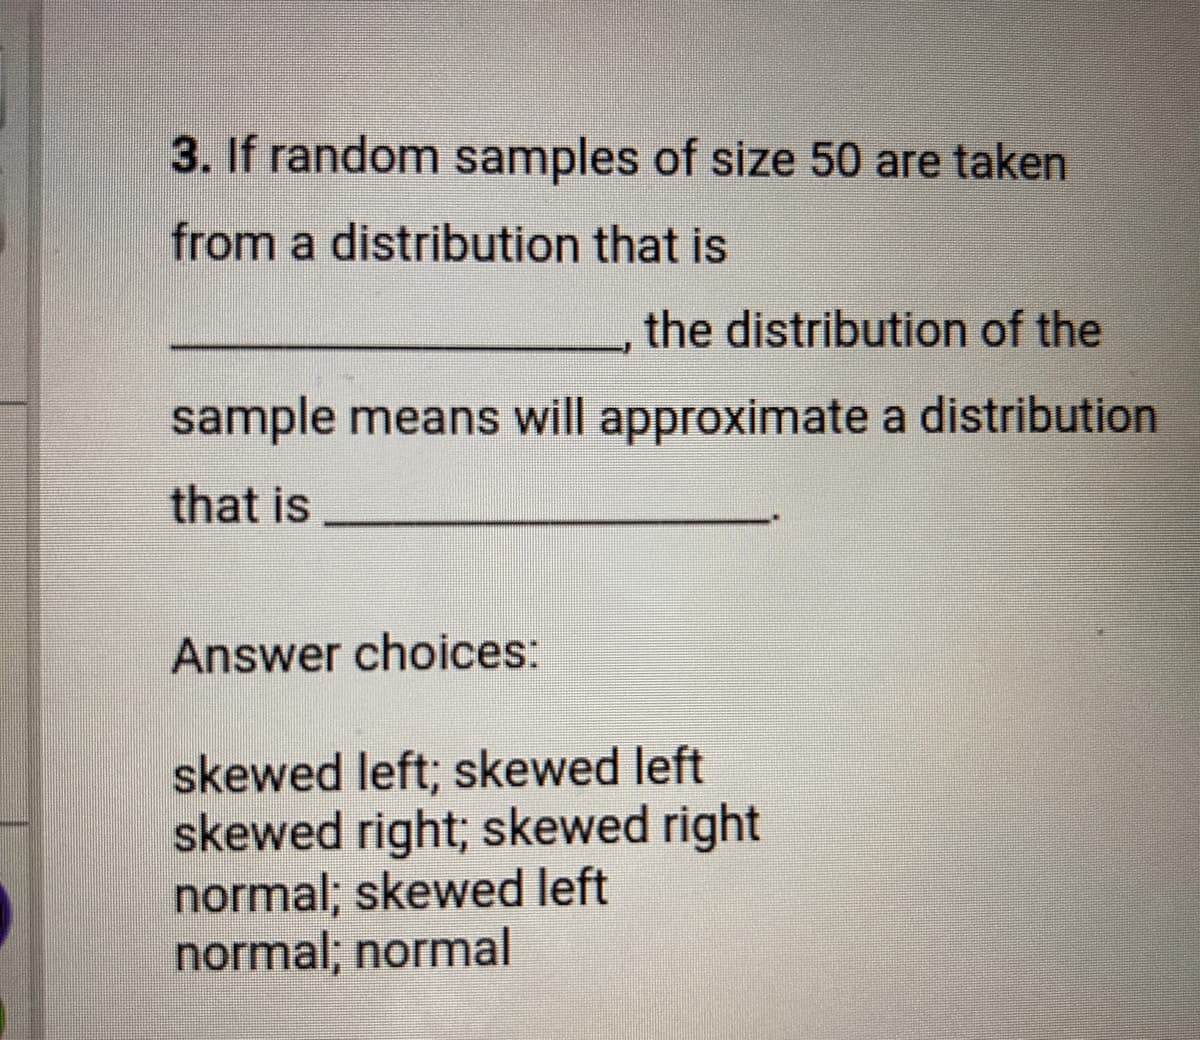 3. If random samples of size 50 are taken
from a distribution that is
the distribution of the
sample means will approximate a distribution
that is
Answer choices:
skewed left; skewed left
skewed right; skewed right
normal; skewed left
normal; normal